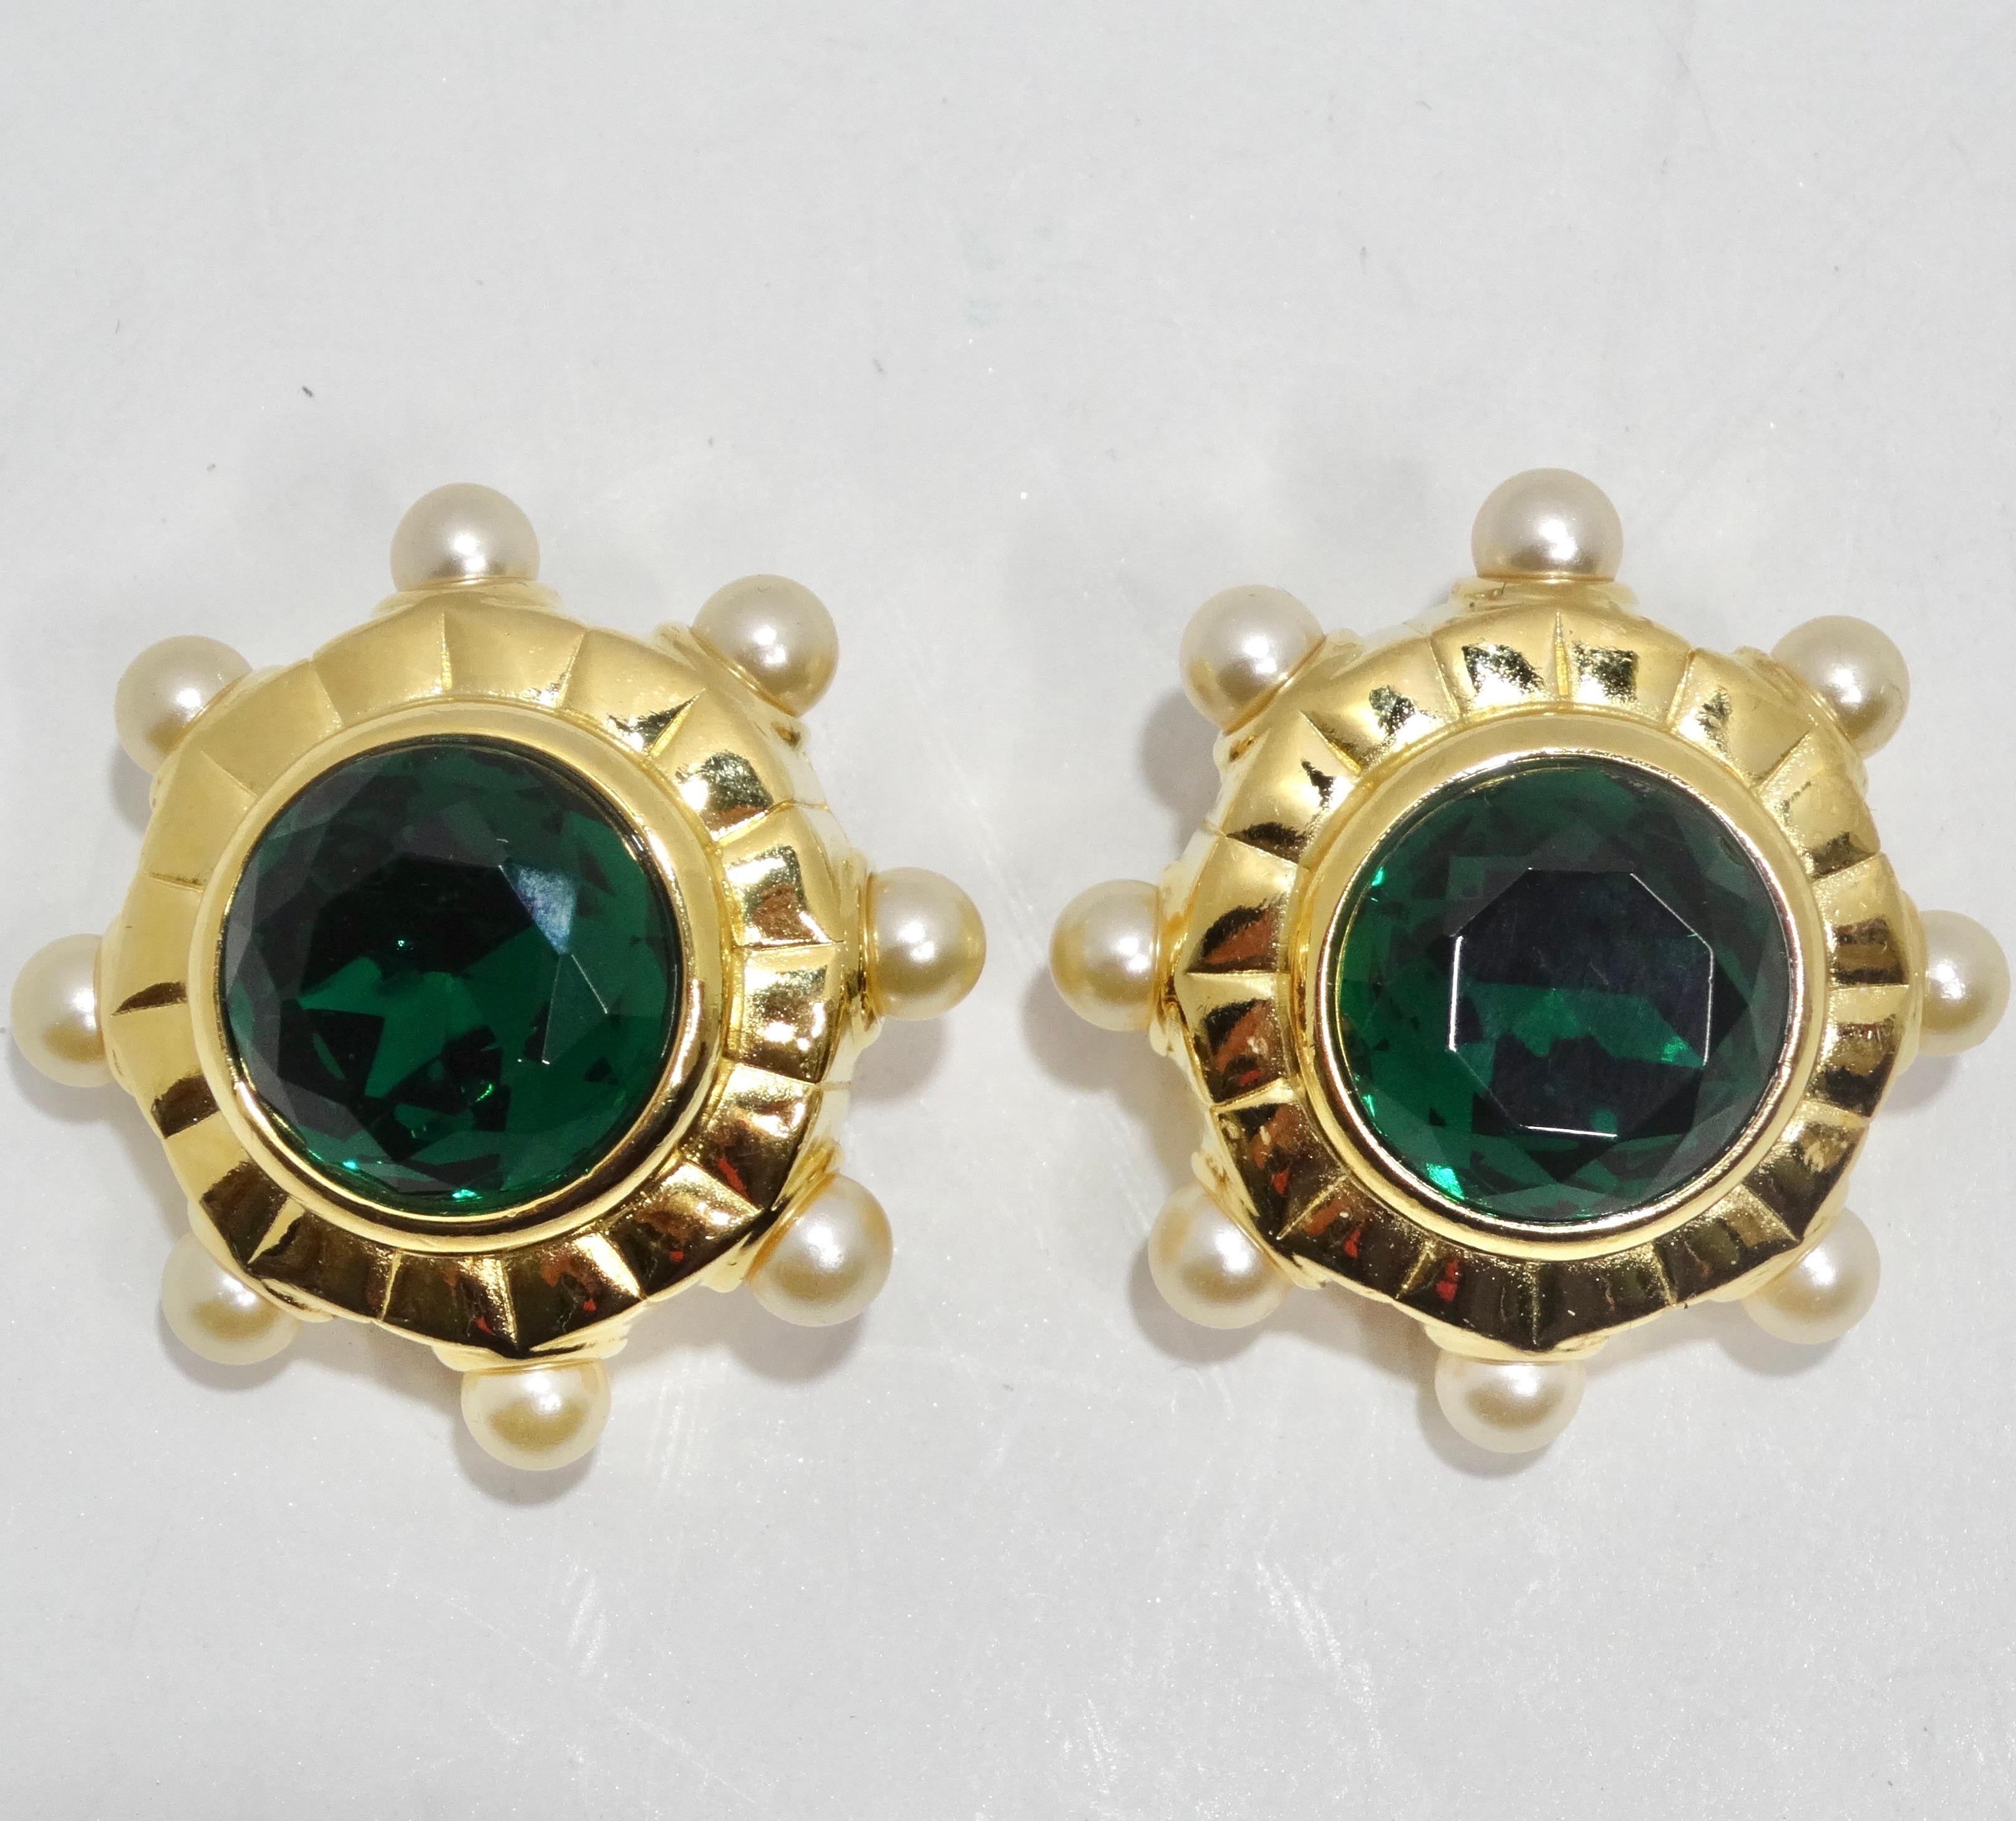 Indulge in the glamorous vintage chic of the Sandra Miller Burrows 1980s Gold Tone Green Gem Pearl Clip-On Earrings. These stunning clip-on earrings feature an emerald green stone at the center, surrounded by a yellow gold plated flower petal-like